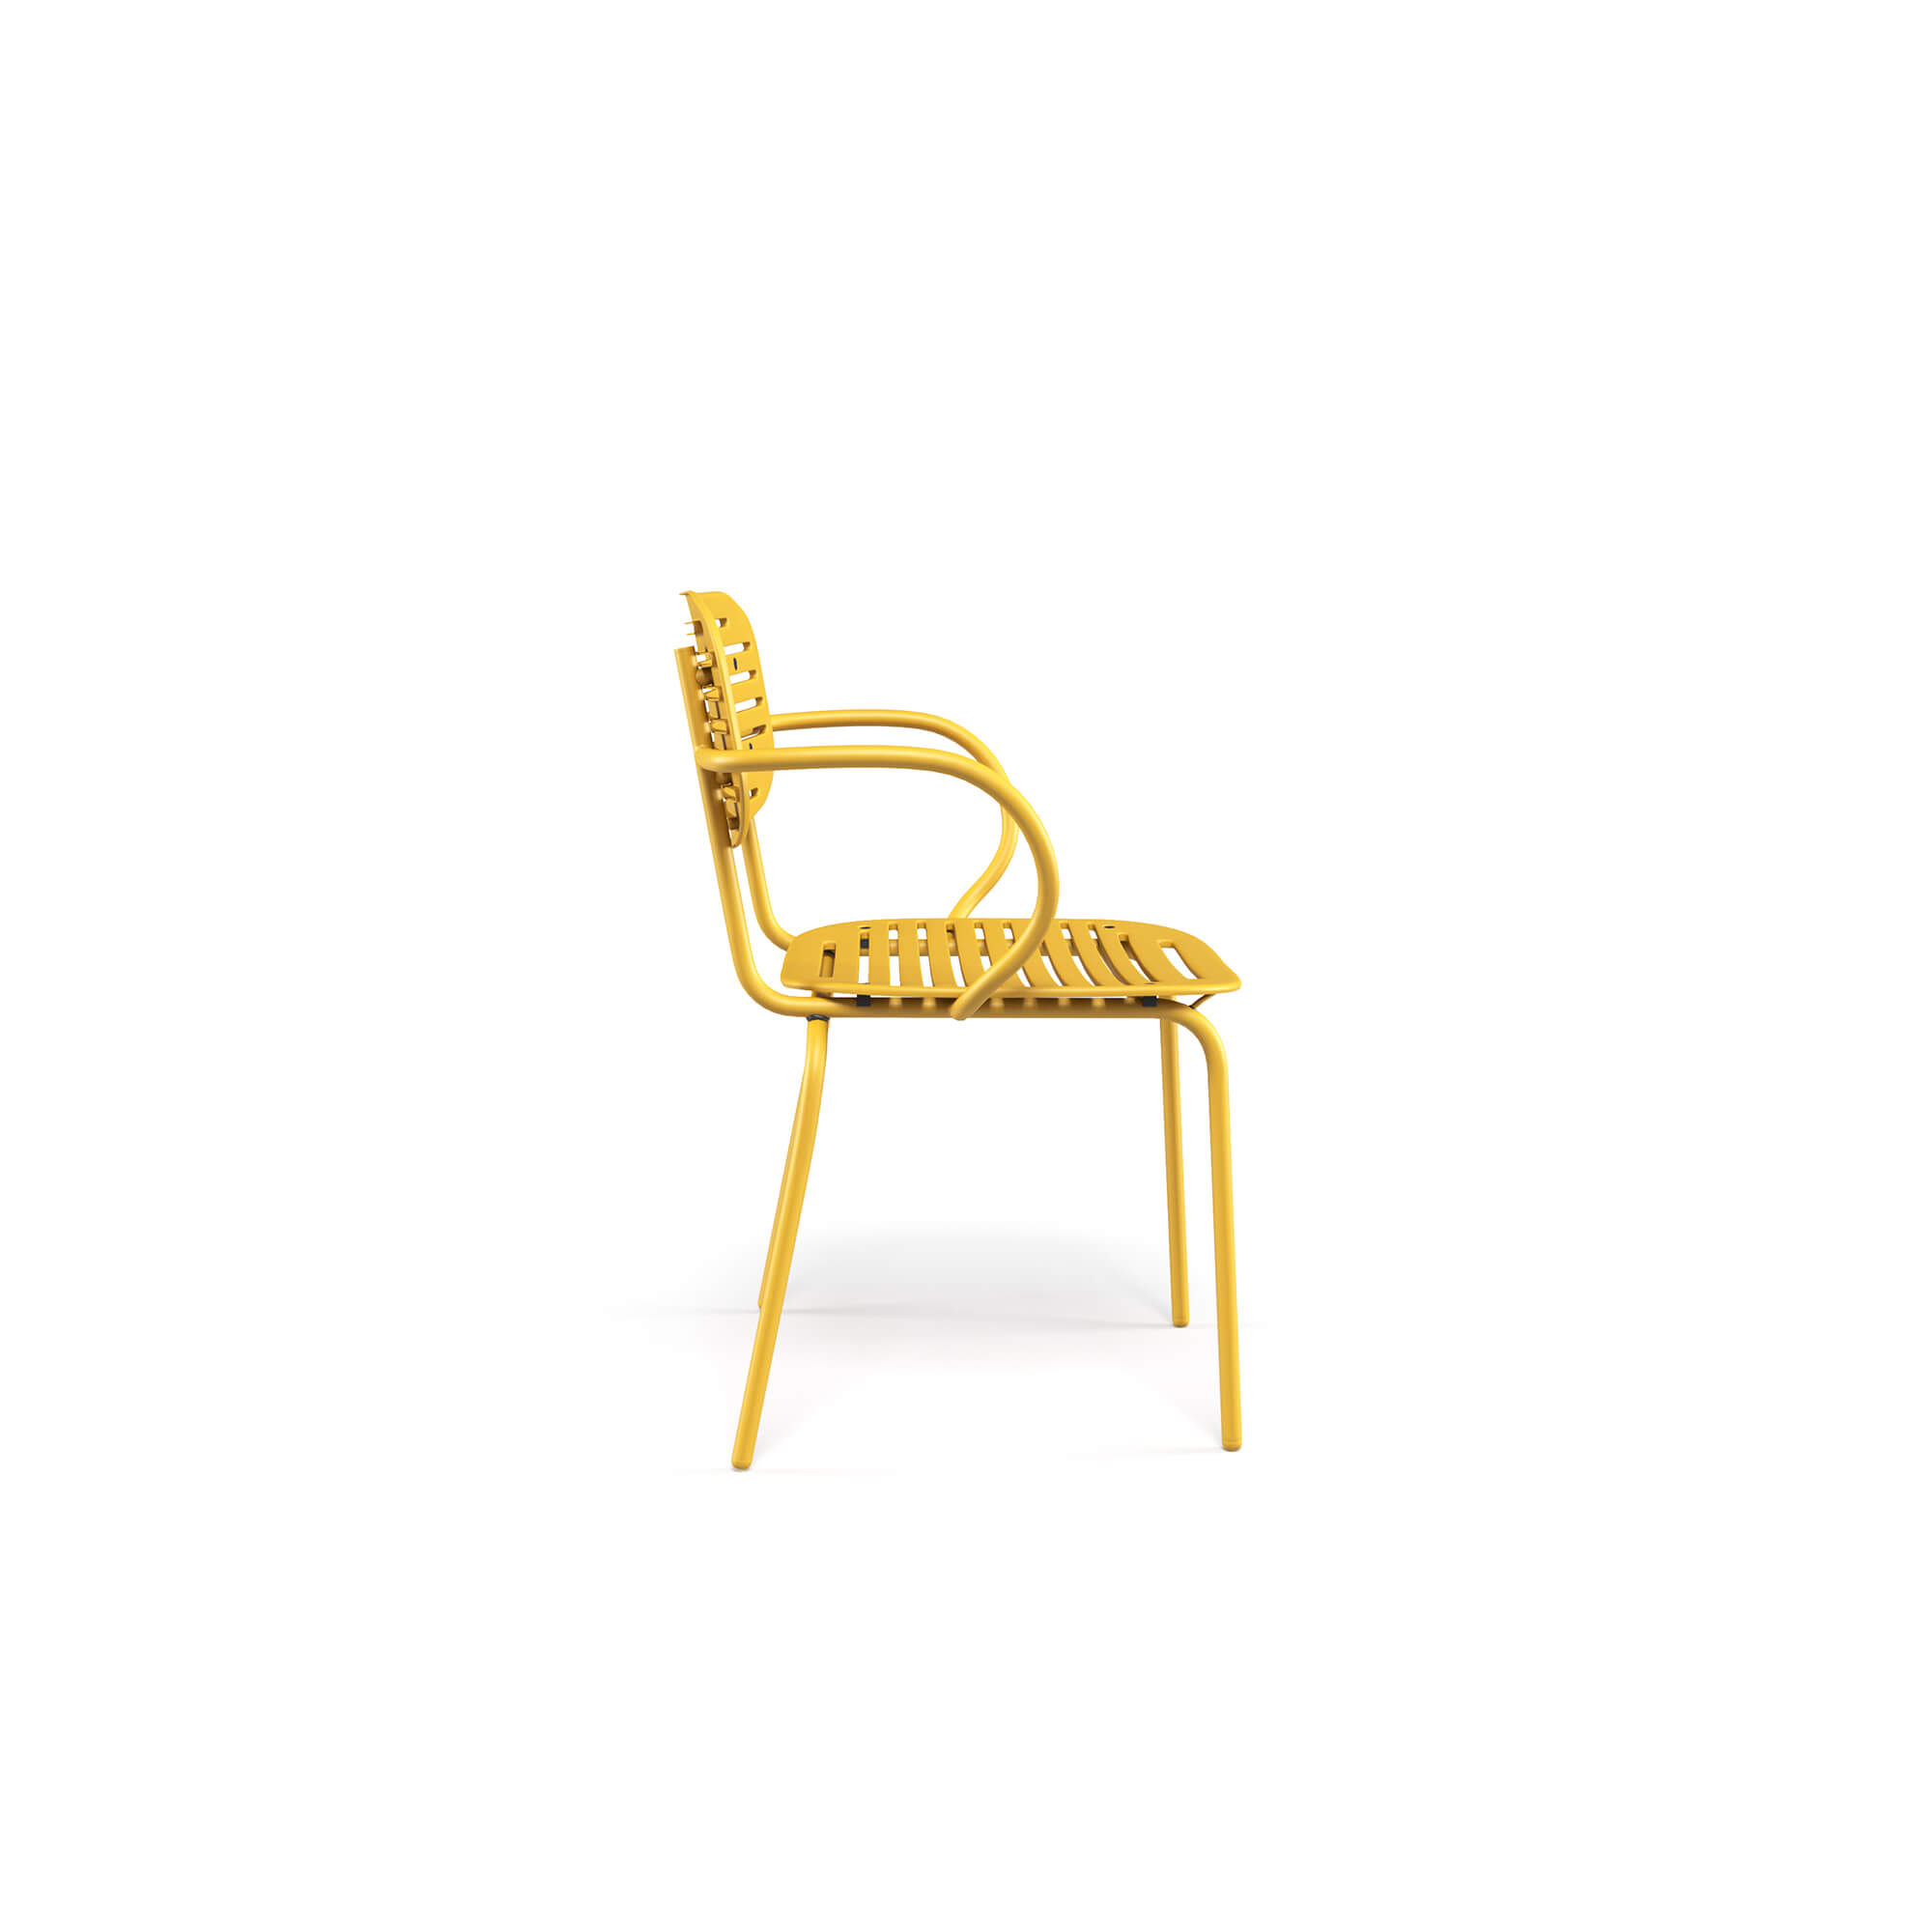 outside in Steel Garden Mom armchair - / Collection